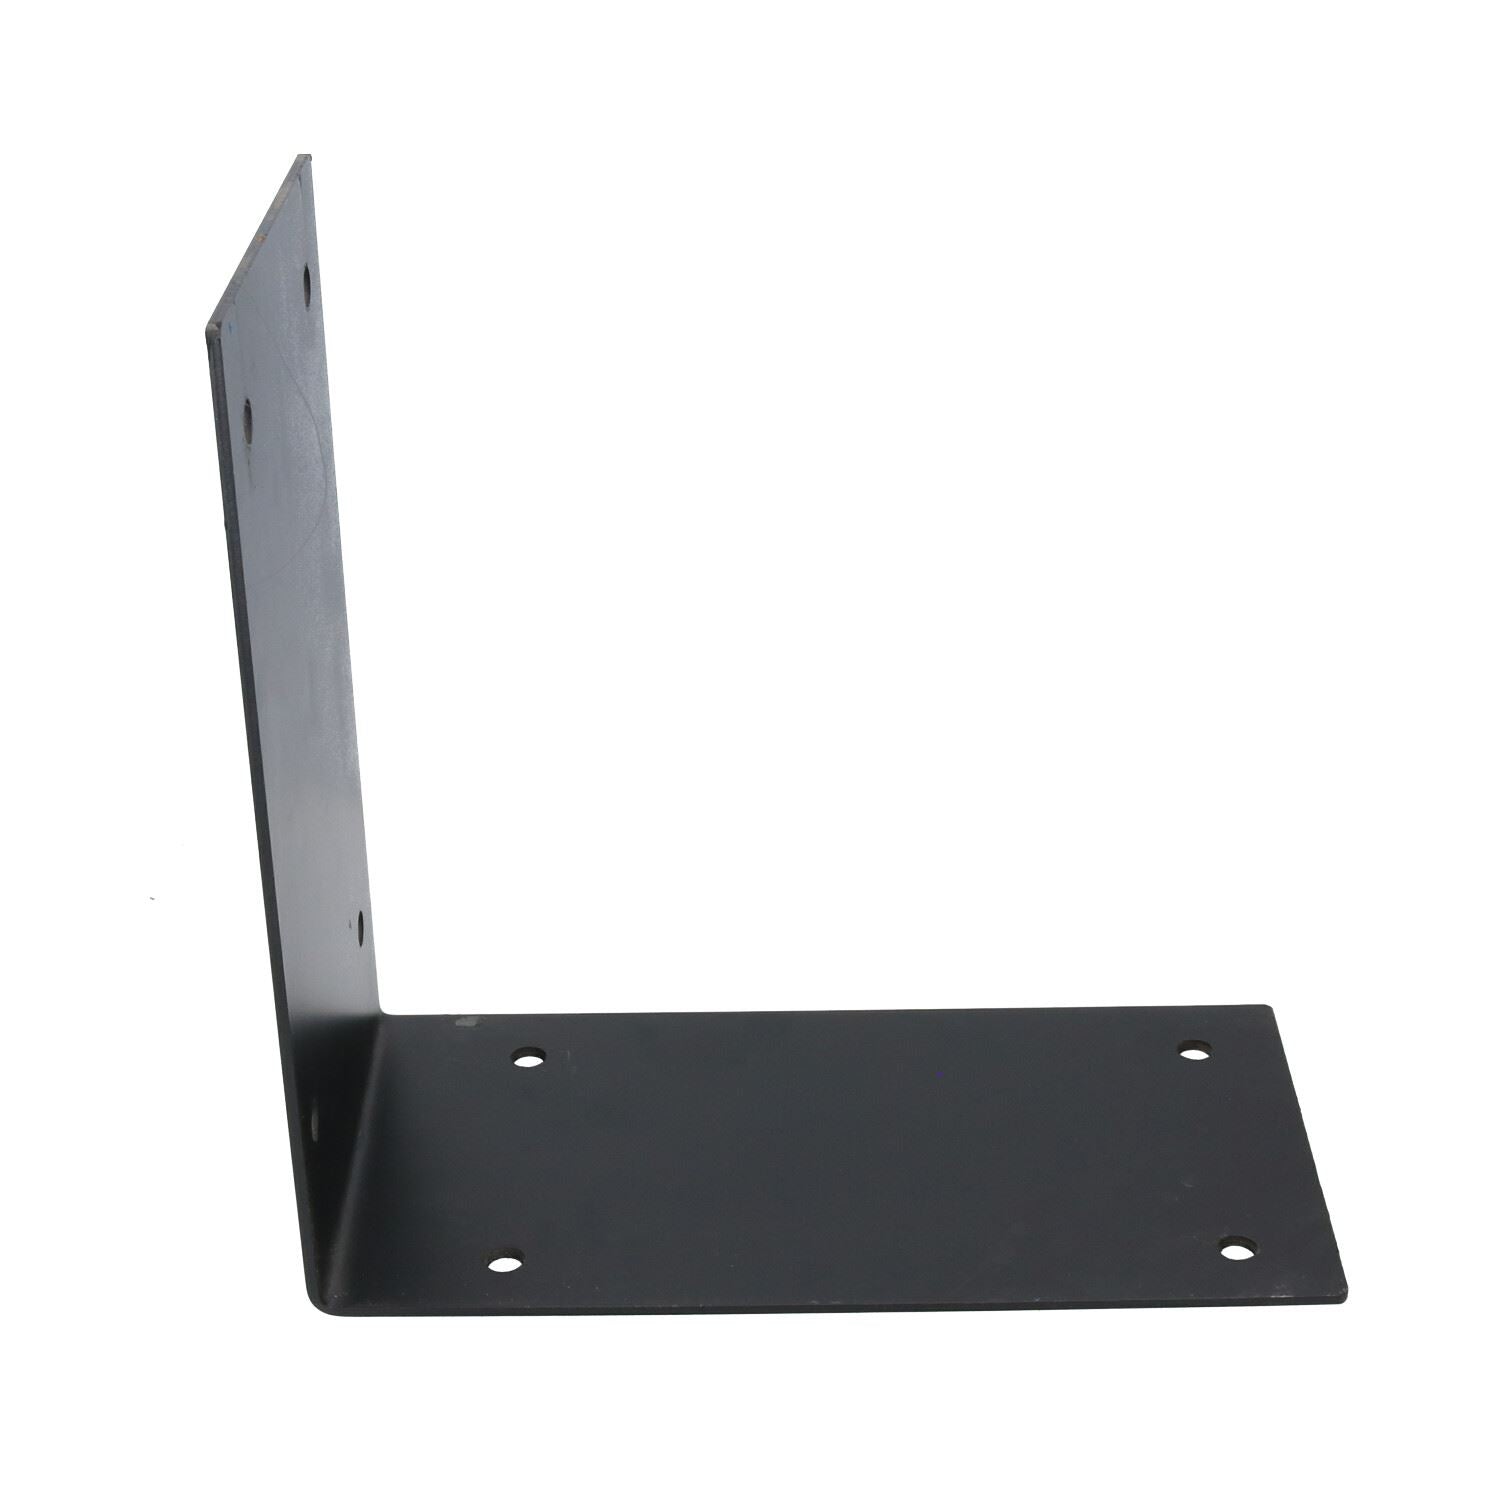 Wall Mount Bracket For Post Box Fixing Stand Metal Plate Right Angle L Brace